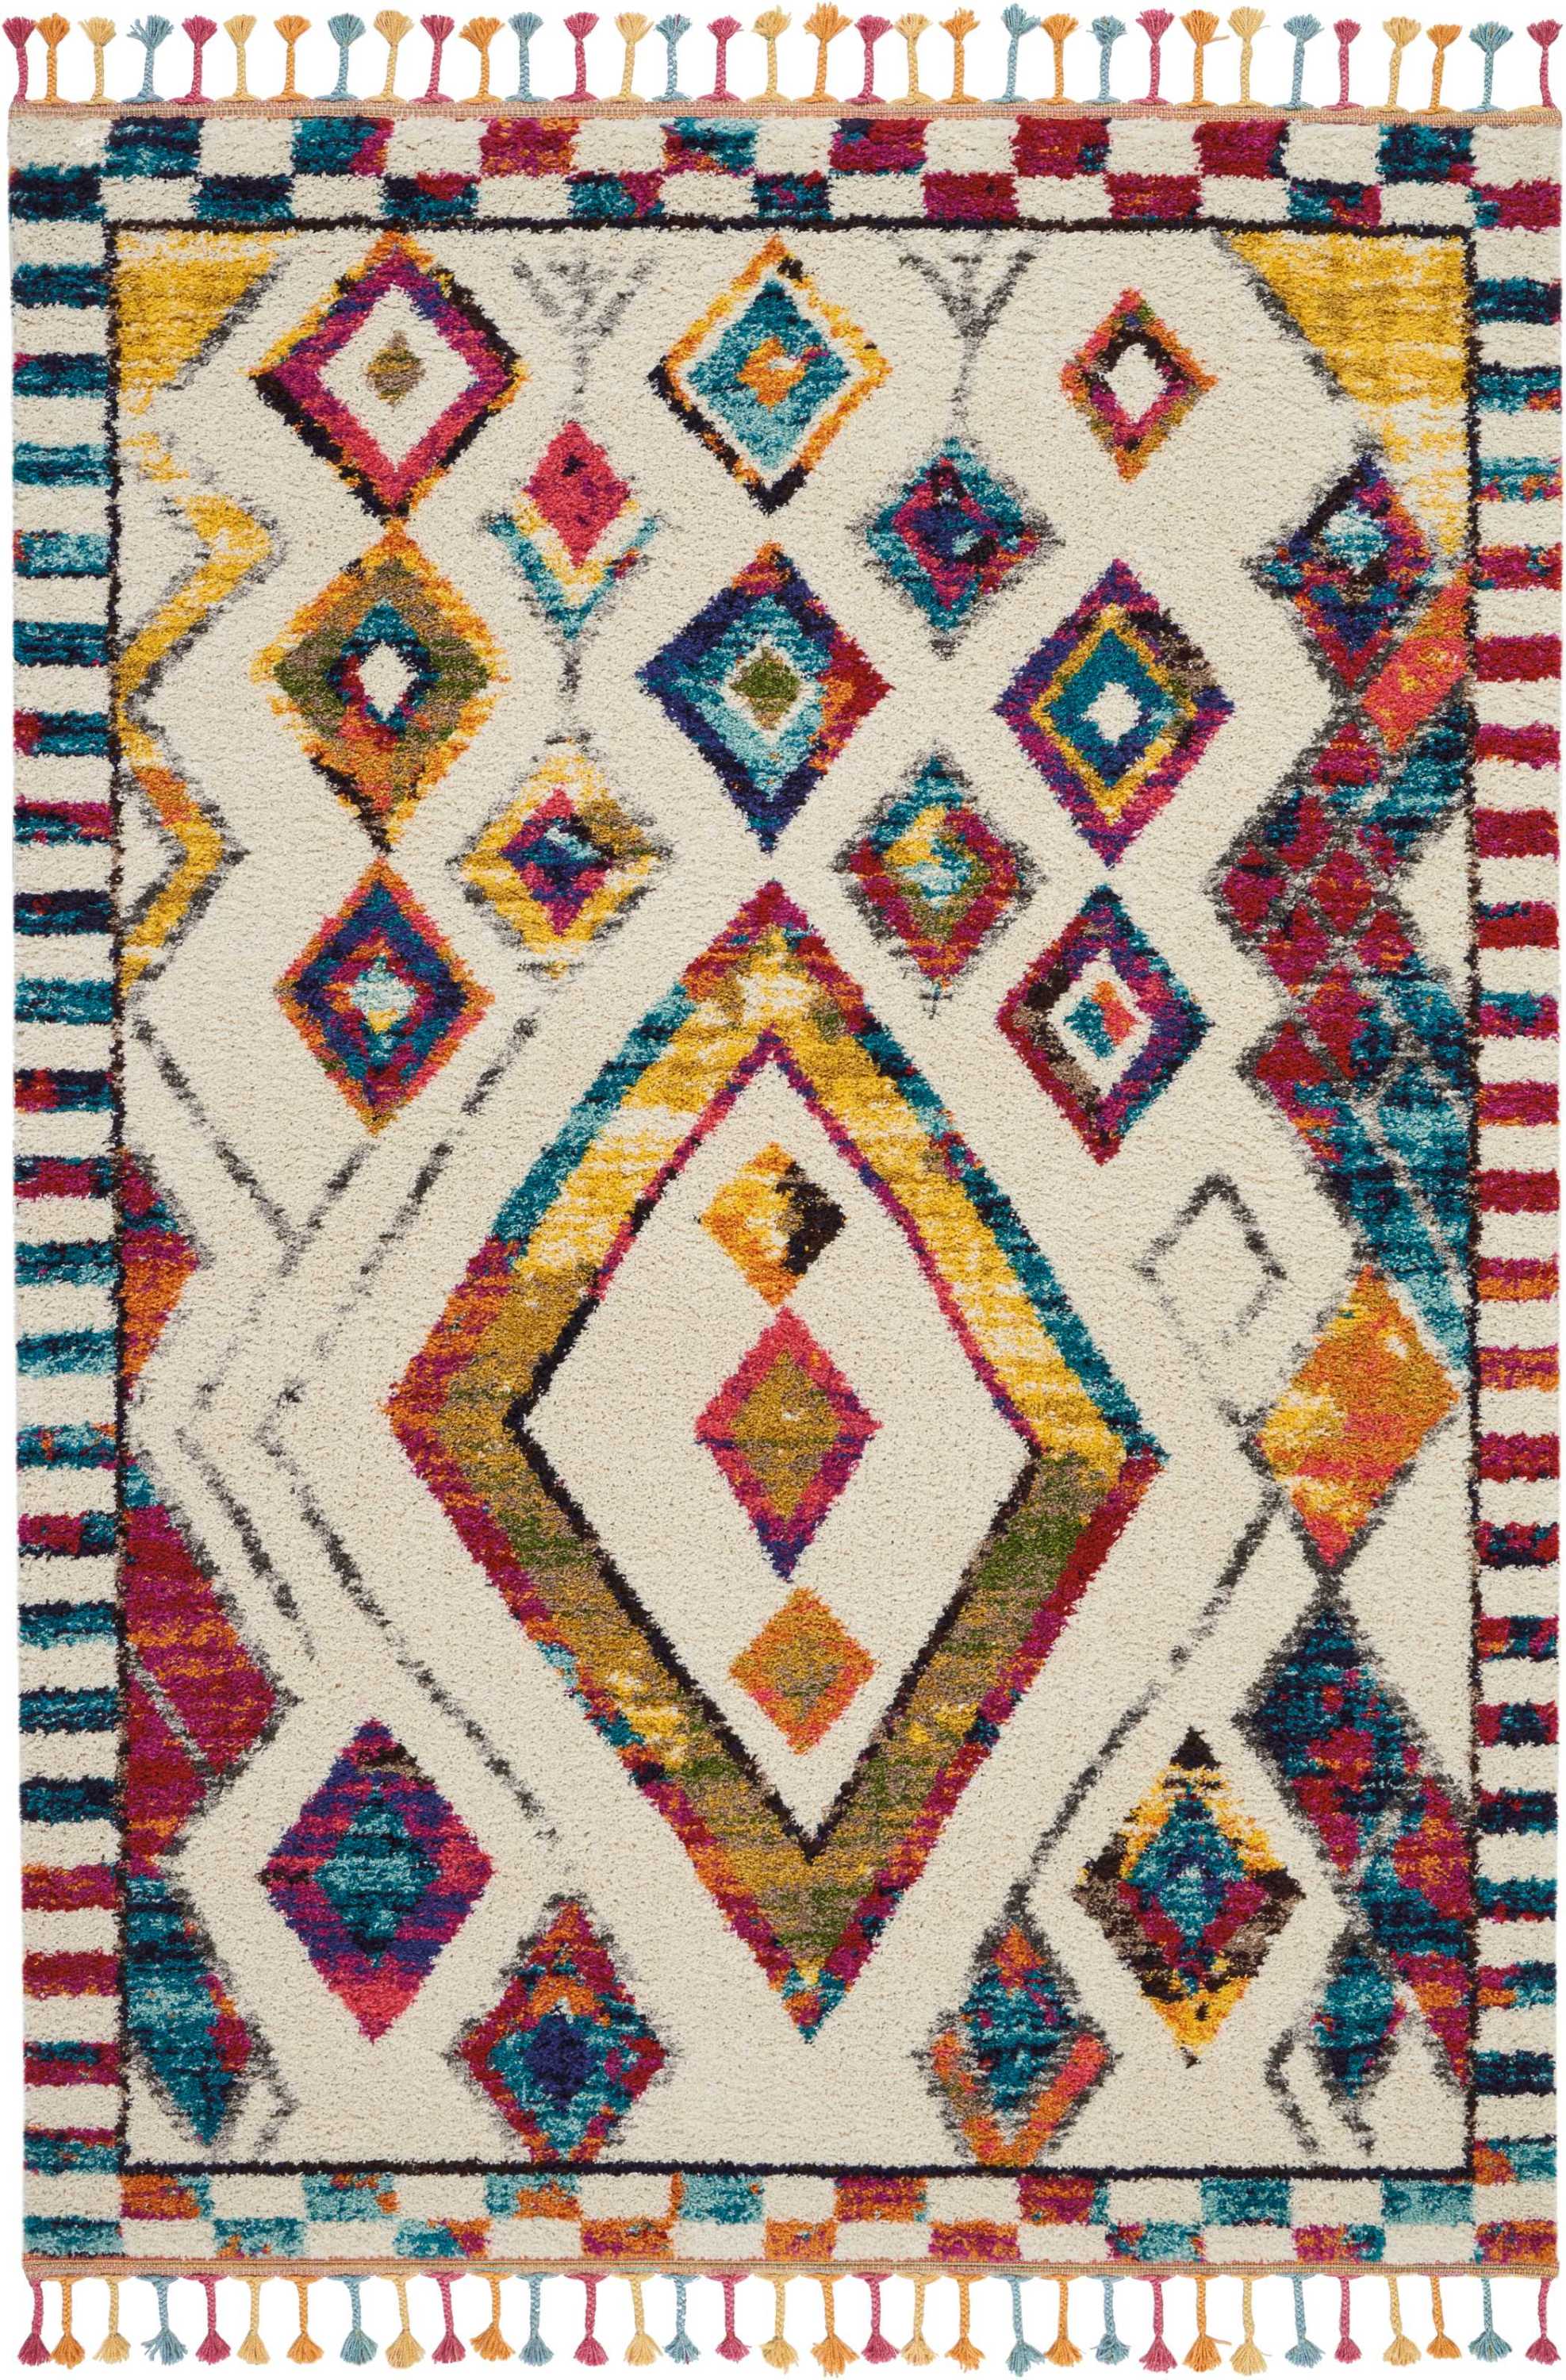 Nourison Moroccan Casbah Tribal Ivory/Multicolor 3'11" x 6' Area Rug, (4x6) - image 2 of 8